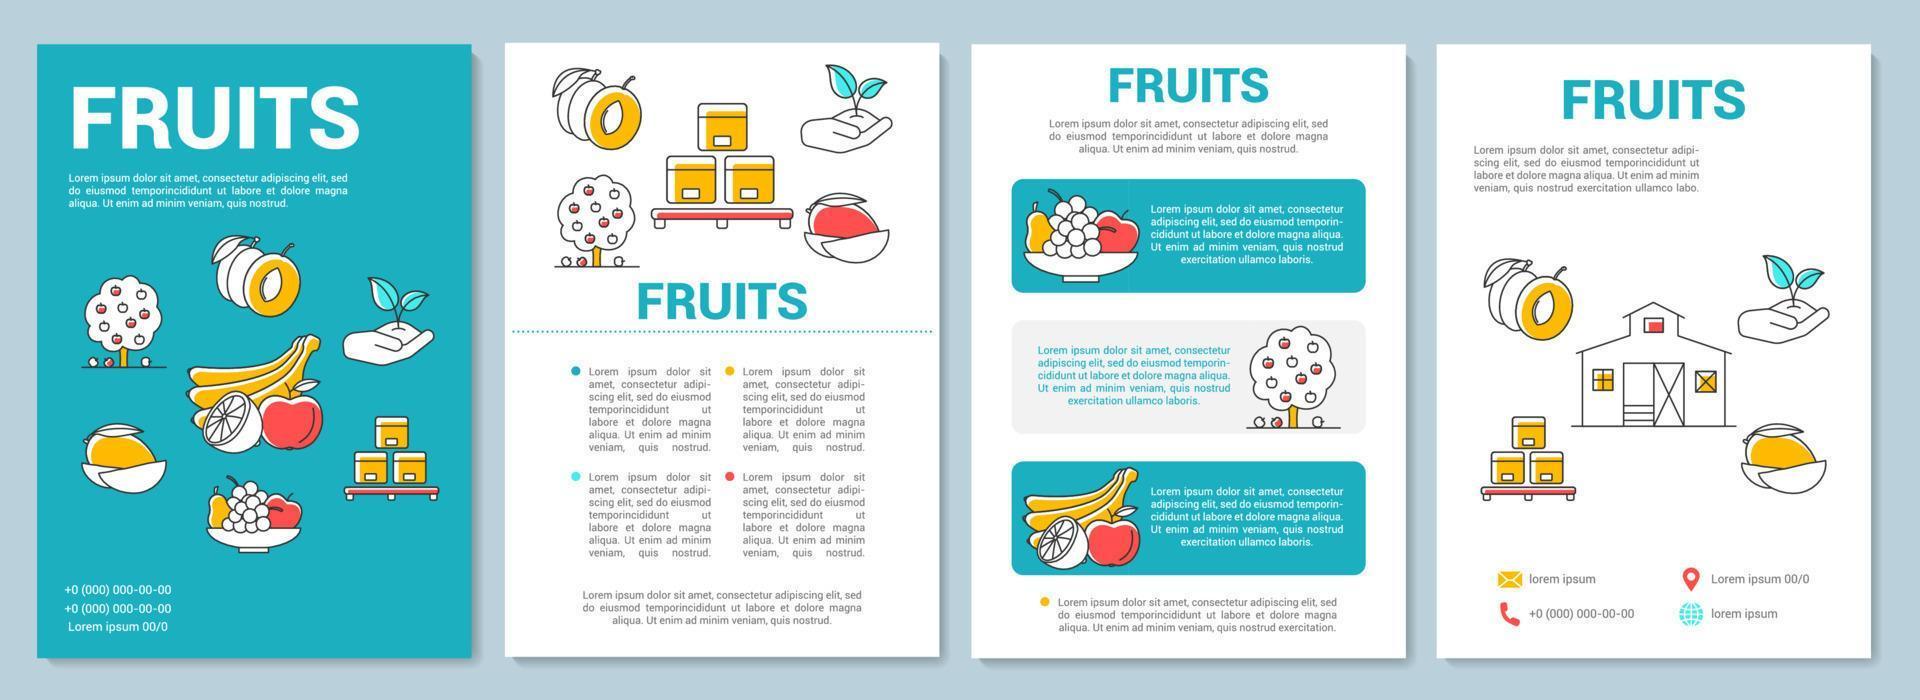 Fruit production template layout. Farming organic produce. Flyer, booklet, leaflet print design with linear illustrations. Vector page layouts for magazines, annual reports, advertising posters